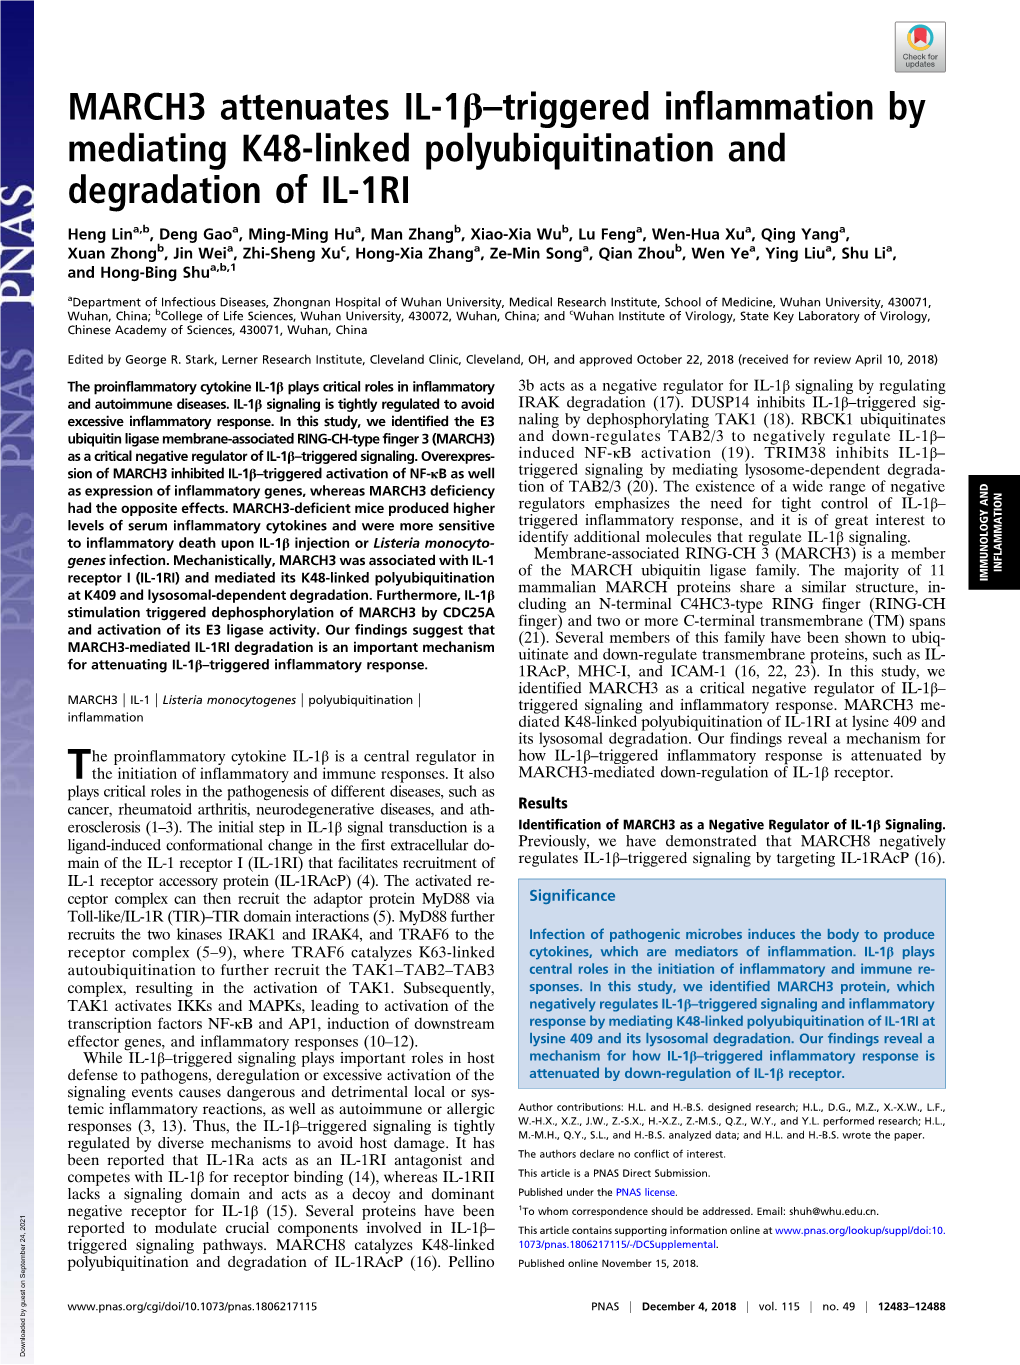 MARCH3 Attenuates IL-1Β–Triggered Inflammation by Mediating K48-Linked Polyubiquitination and Degradation of IL-1RI